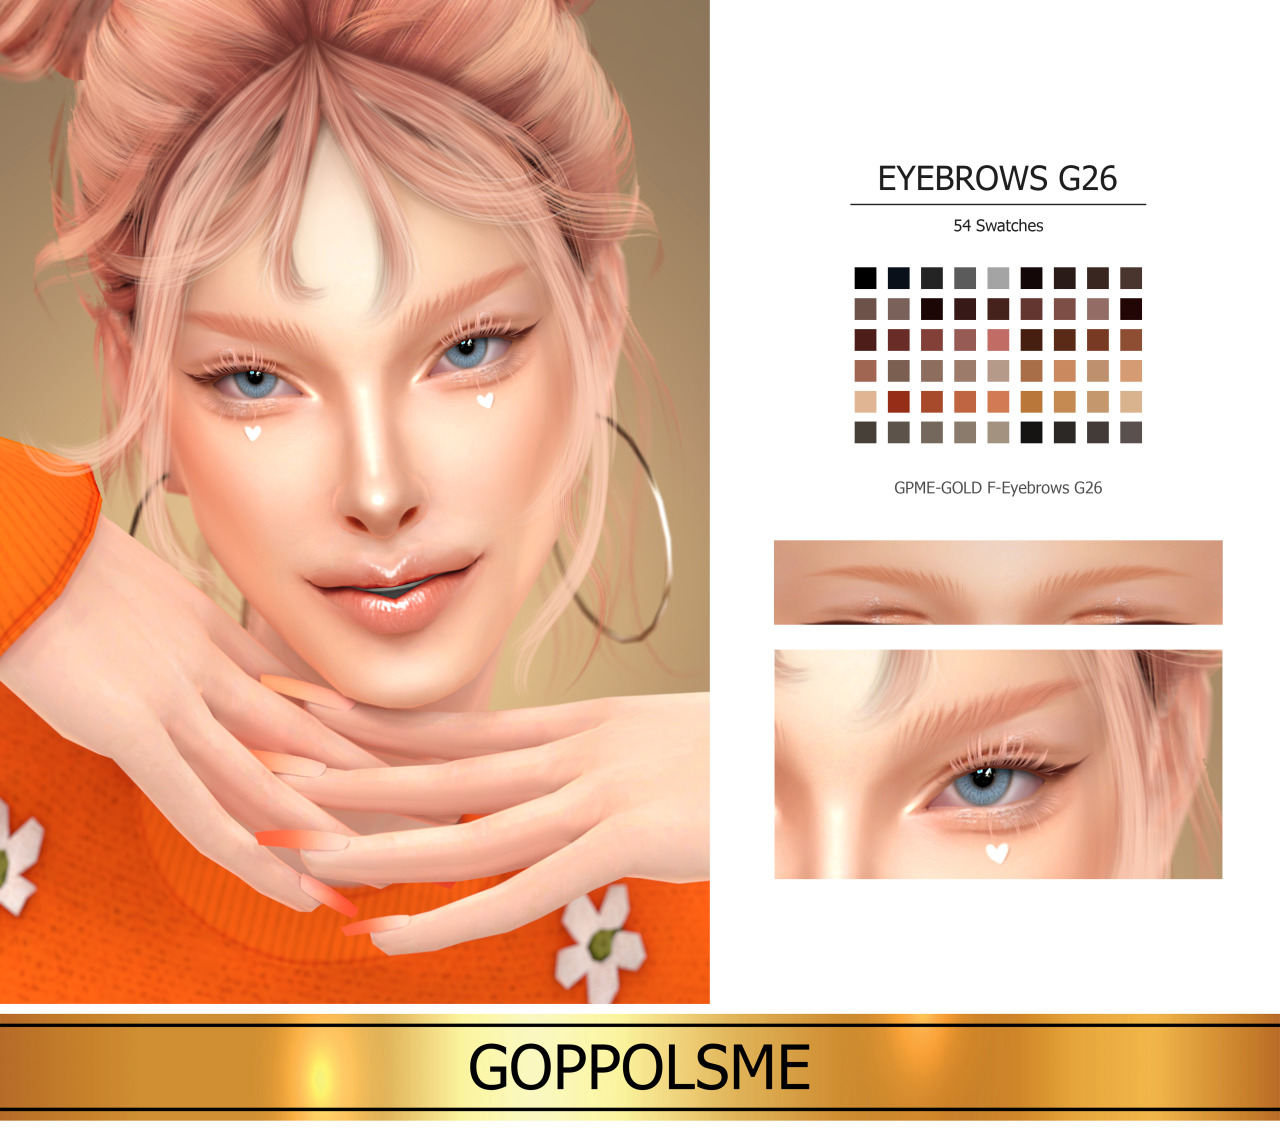 GPME-GOLD F-Eyebrows G26Download at GOPPOLSME patreon ( No ad )Access to Exclusive GOPPOLSME Patreon onlyHQ mod compatibleThank for support me  ❤  Thanks for all CC creators ❤Hope you like it .Please don’t re-upload #goppolsme#thesims4#sims4cc#sims4ccfinds#sims4brow#s4cc#s4ccfinds#s4brows